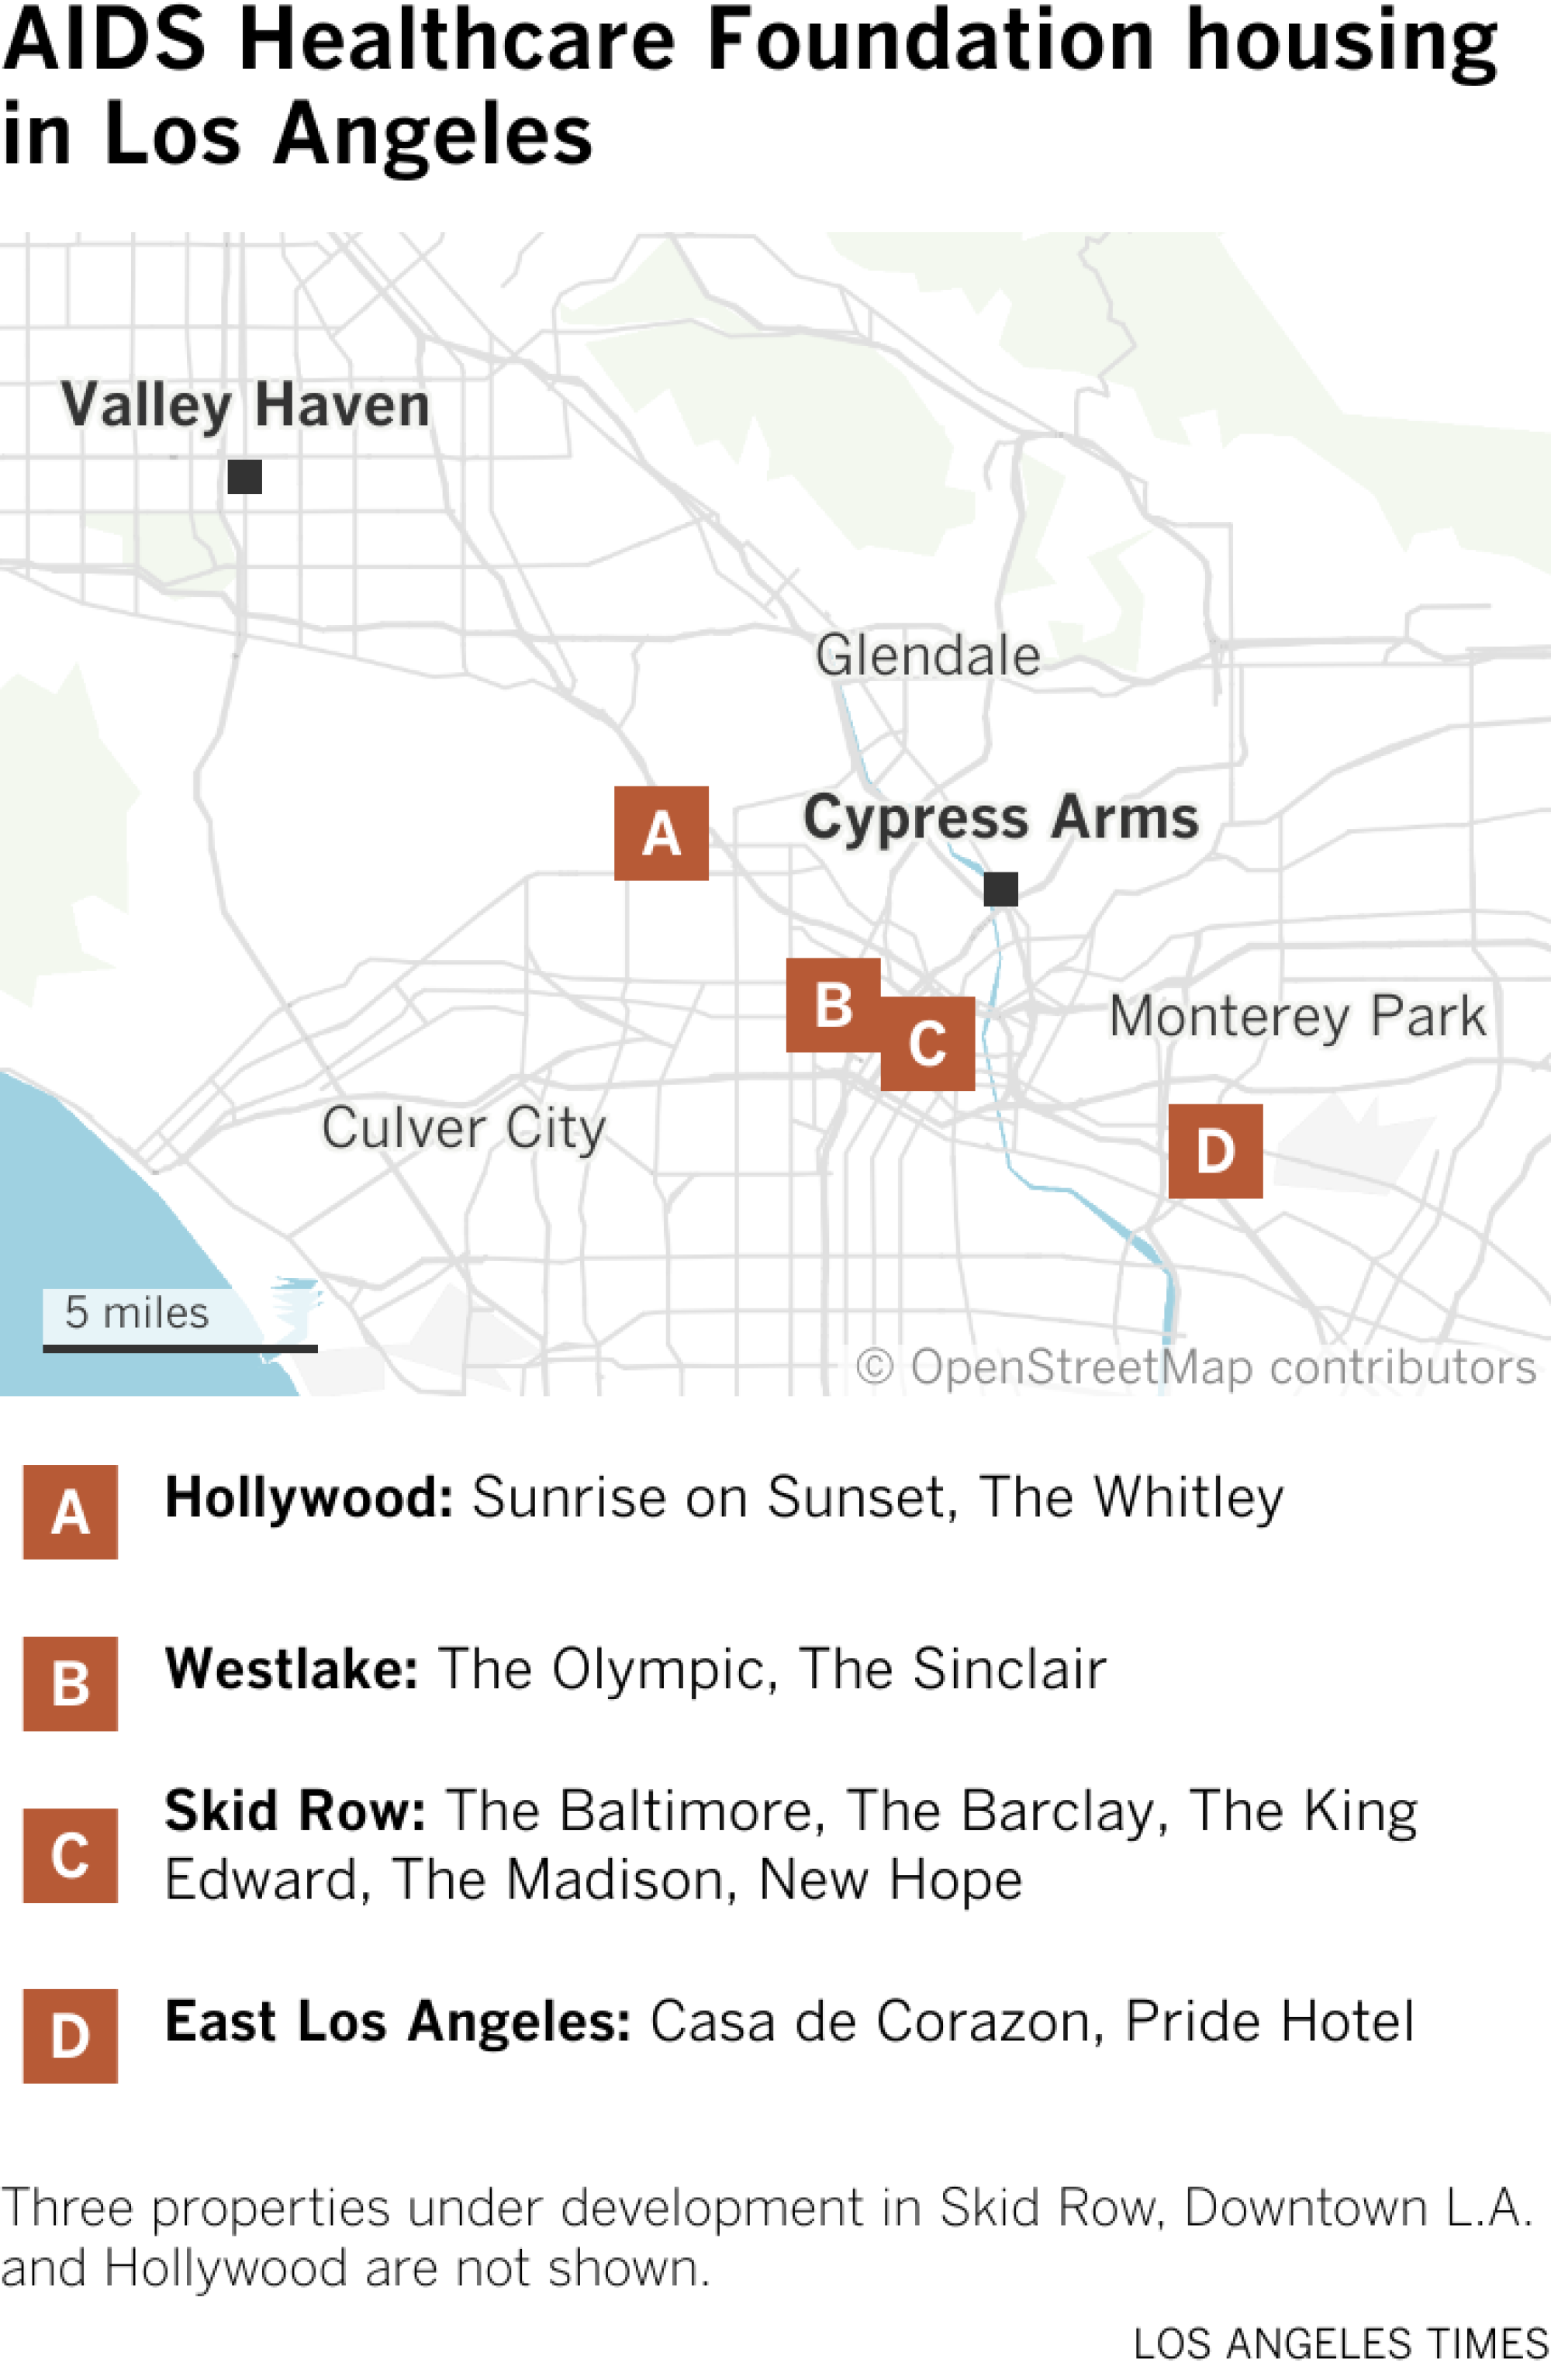 Map shows thirteen residential properties owned by the AIDS Healthcare Foundation spread out between San Fernando Valley and East Los Angeles. There is one in the San Fernando Valley, two in Hollywood, two in Westlake, five in Skid Row and two in East Los Angeles. Three other properties under development not shown.